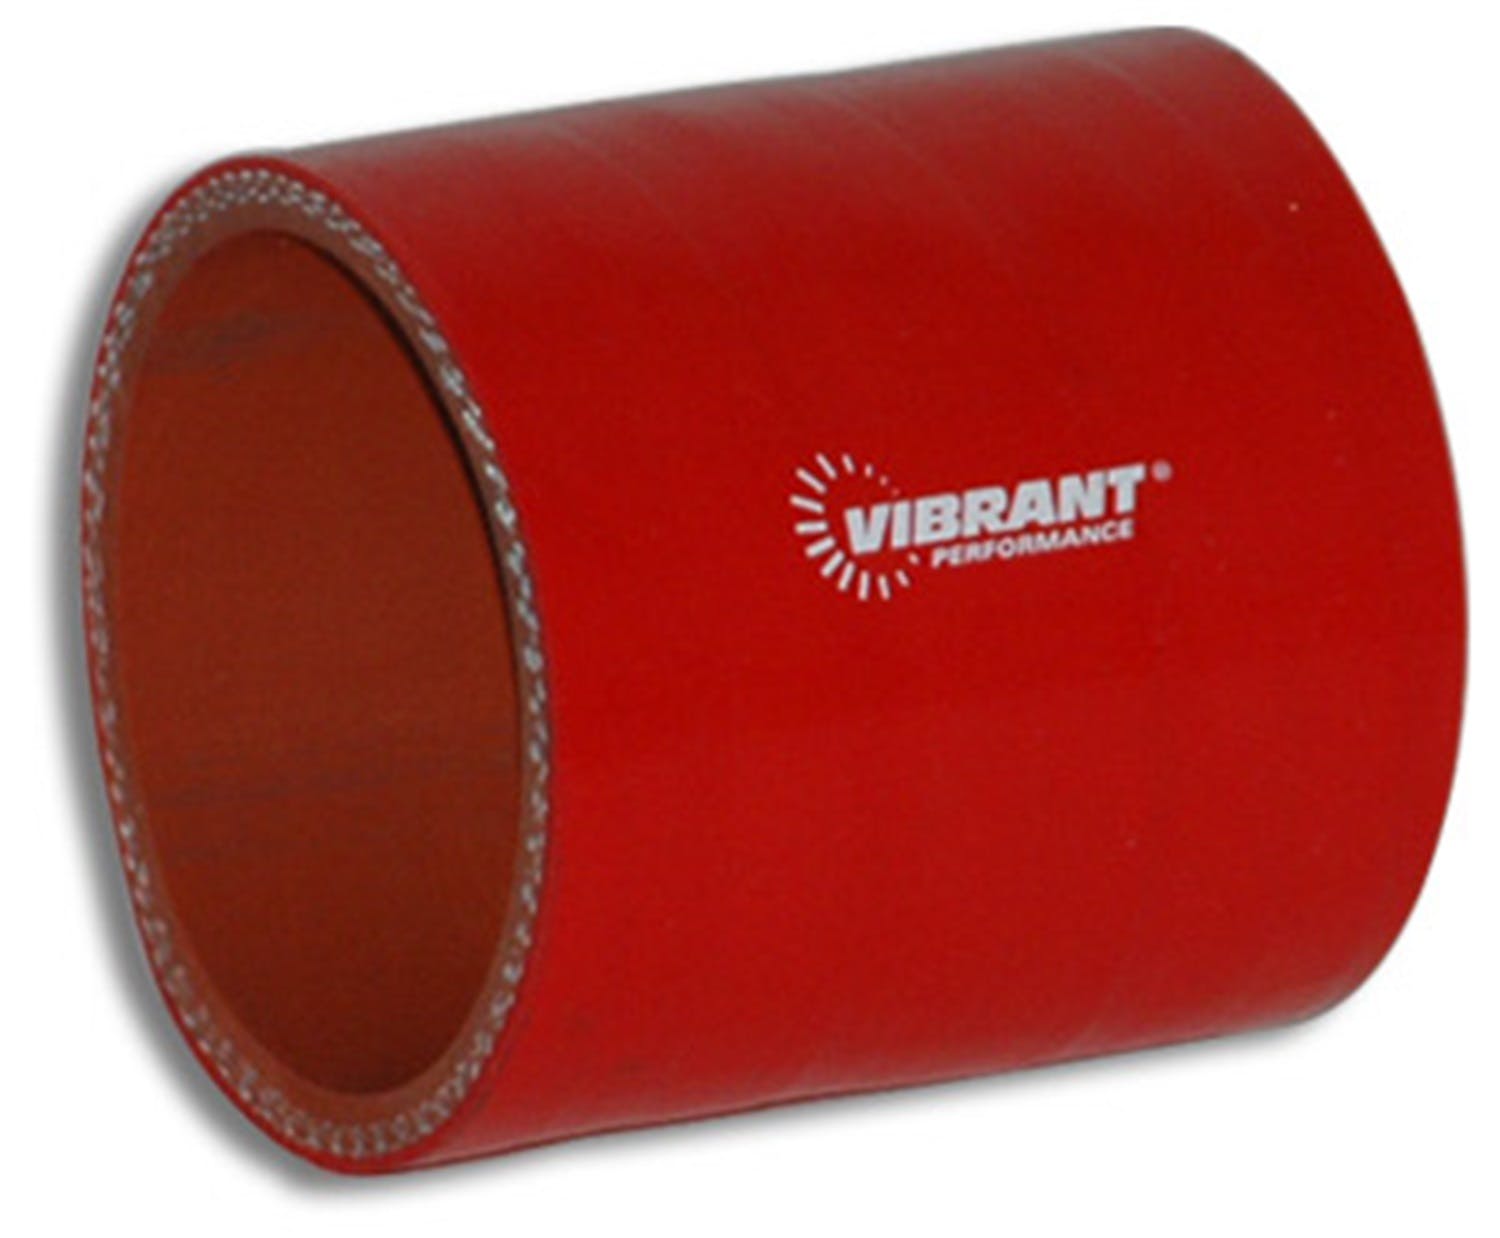 Vibrant Performance 2712R 4 Ply Silicone Sleeve, 2.75 inch I.D. x 3 inch Long - Red